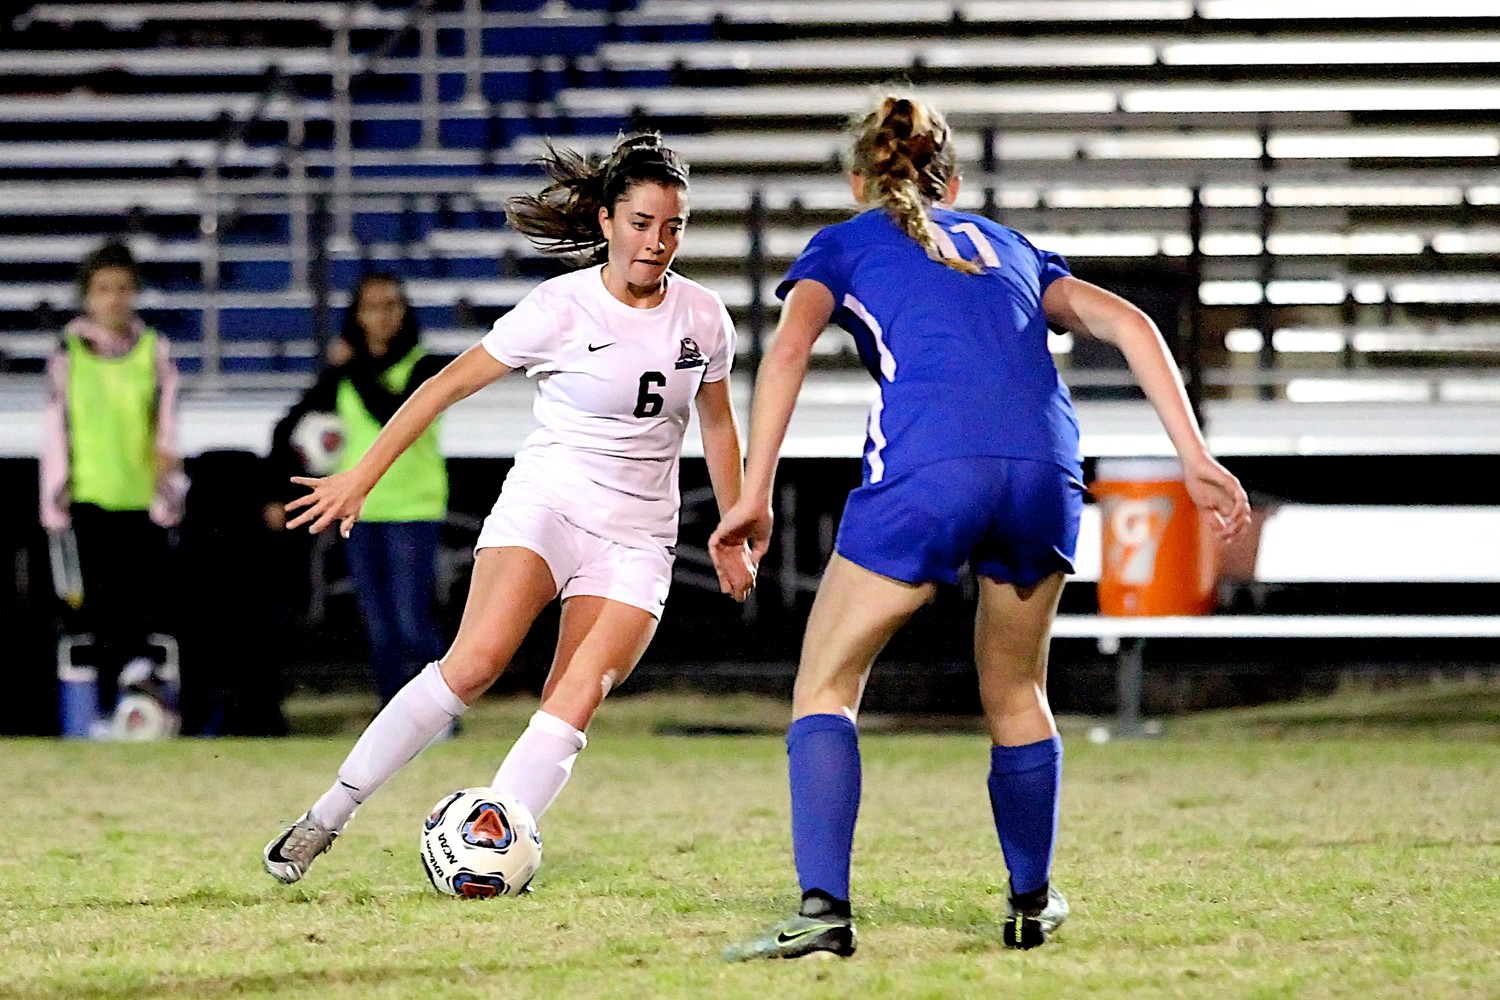 Molly Miler of the Sharks moves the ball past a Pedro defender.